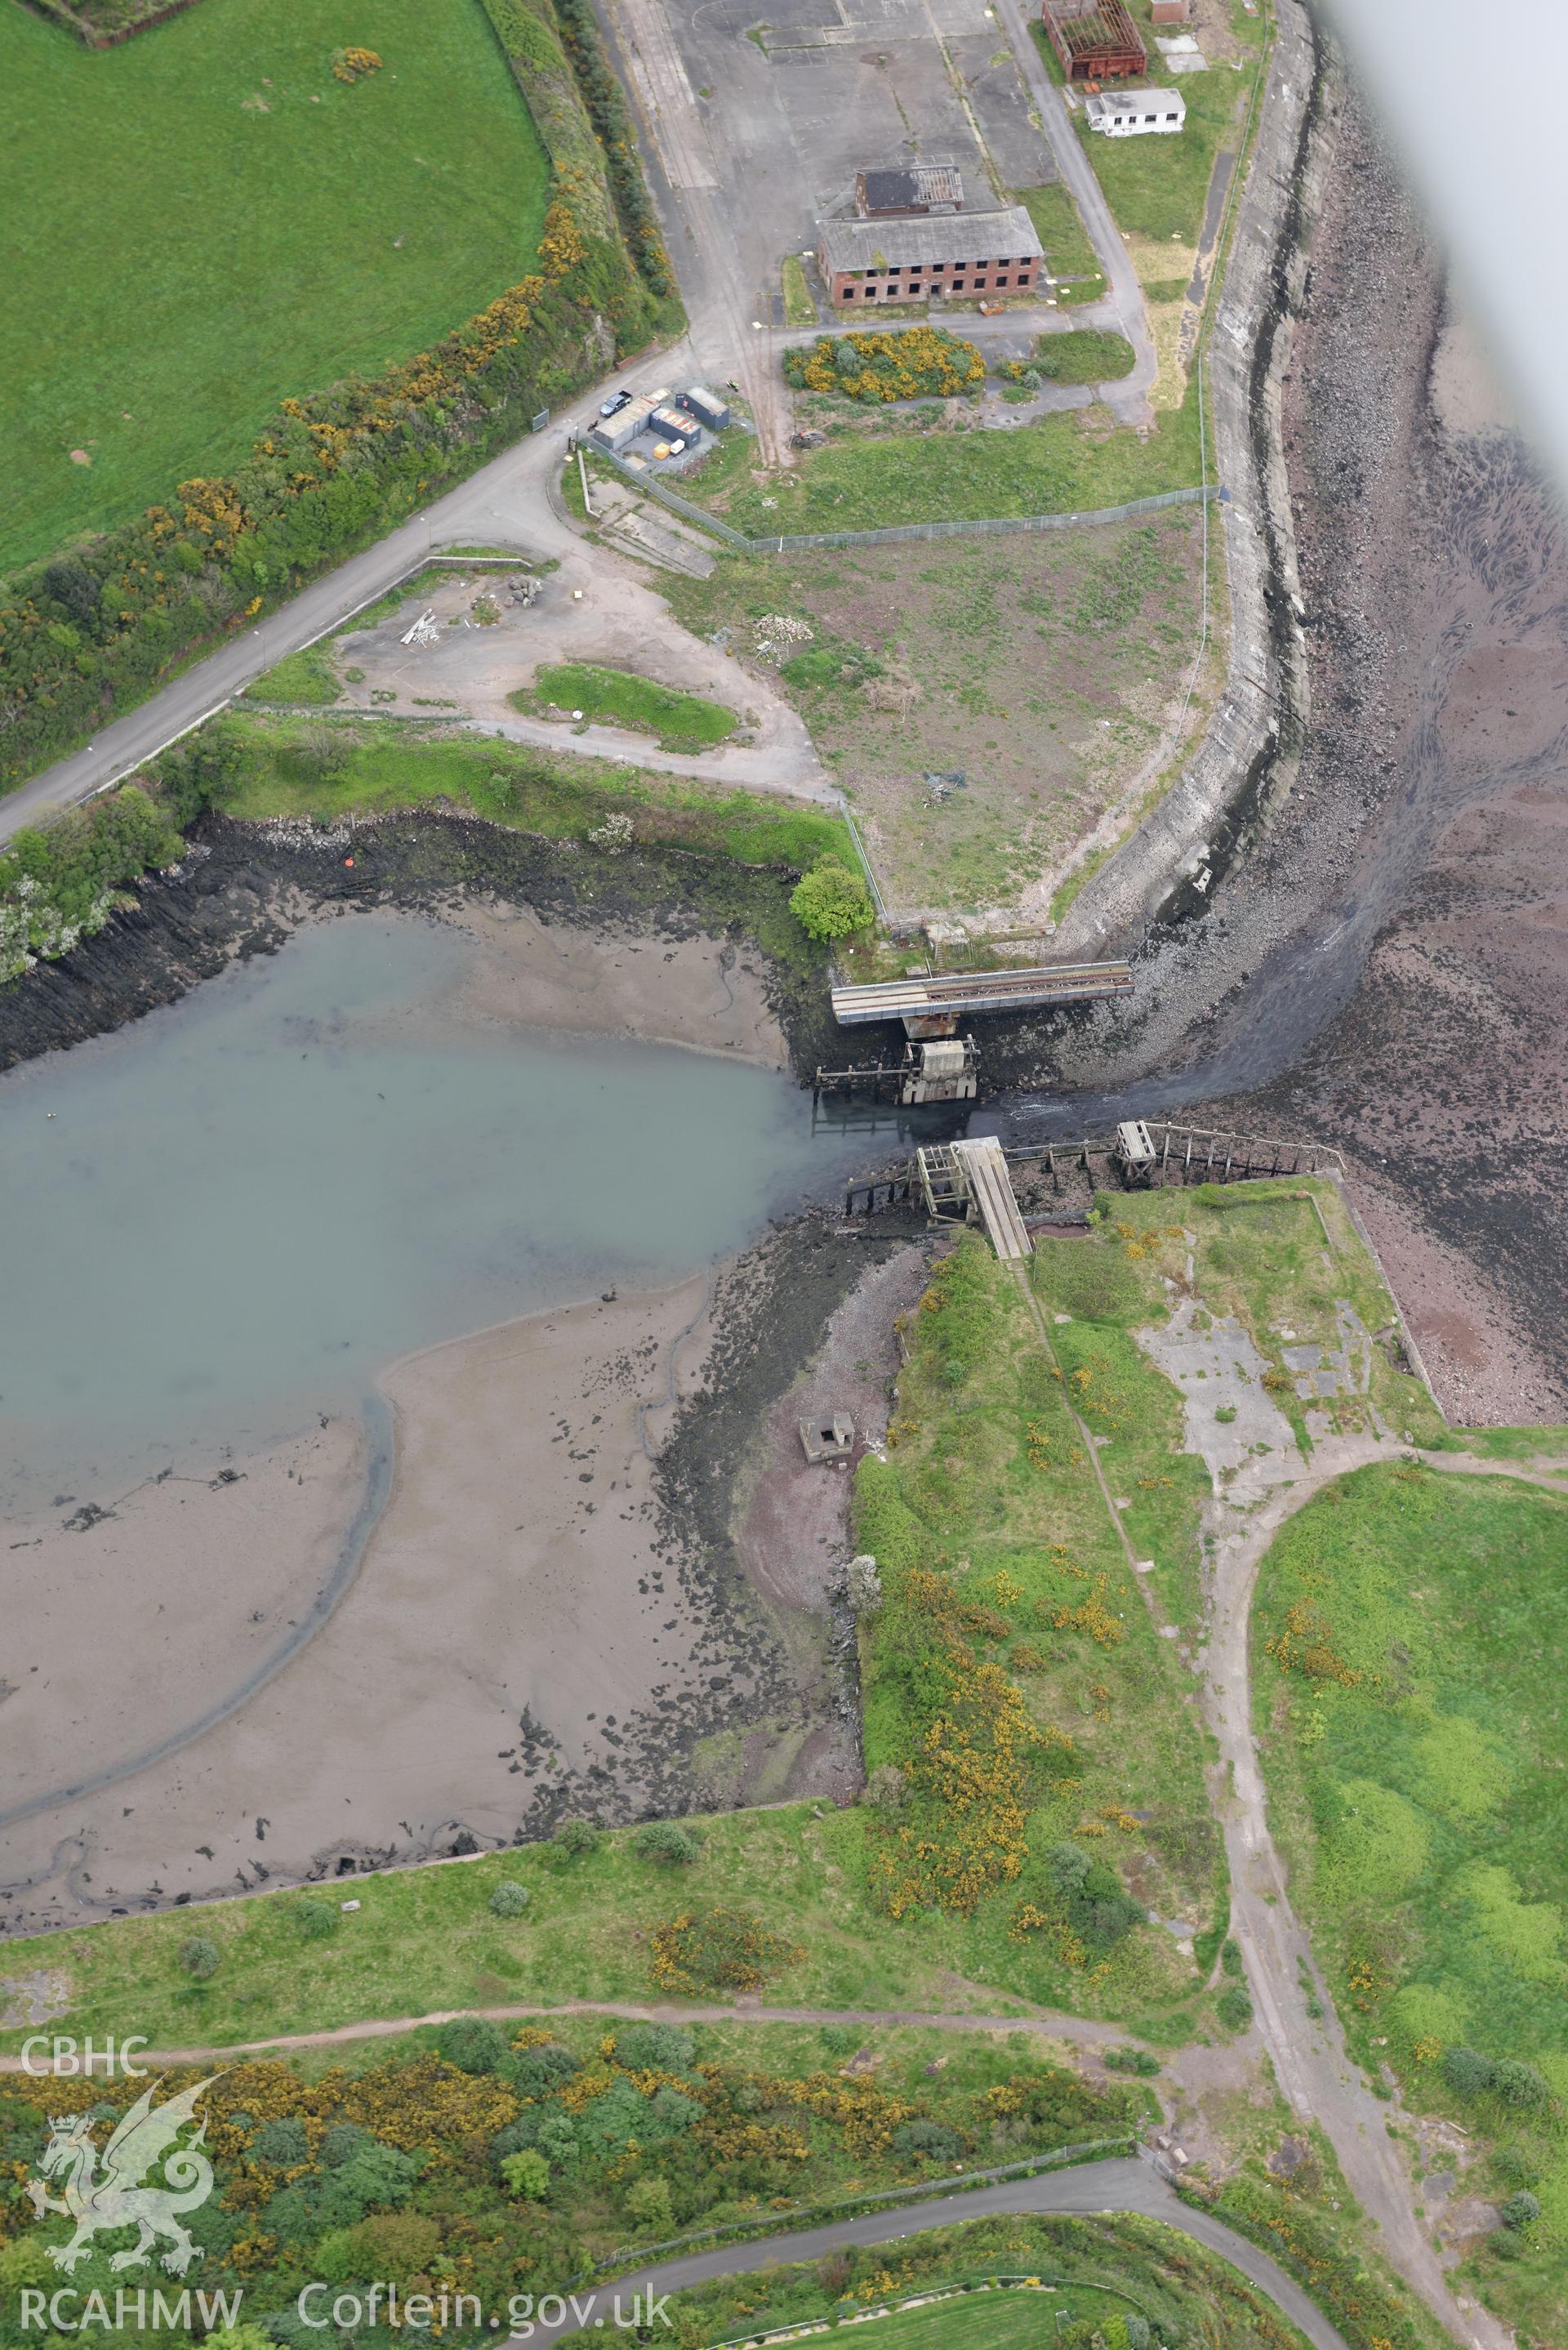 Castle Pill Railway Bridge at low tide. Baseline aerial reconnaissance survey for the CHERISH Project. ? Crown: CHERISH PROJECT 2017. Produced with EU funds through the Ireland Wales Co-operation Programme 2014-2020. All material made freely available through the Open Government Licence.